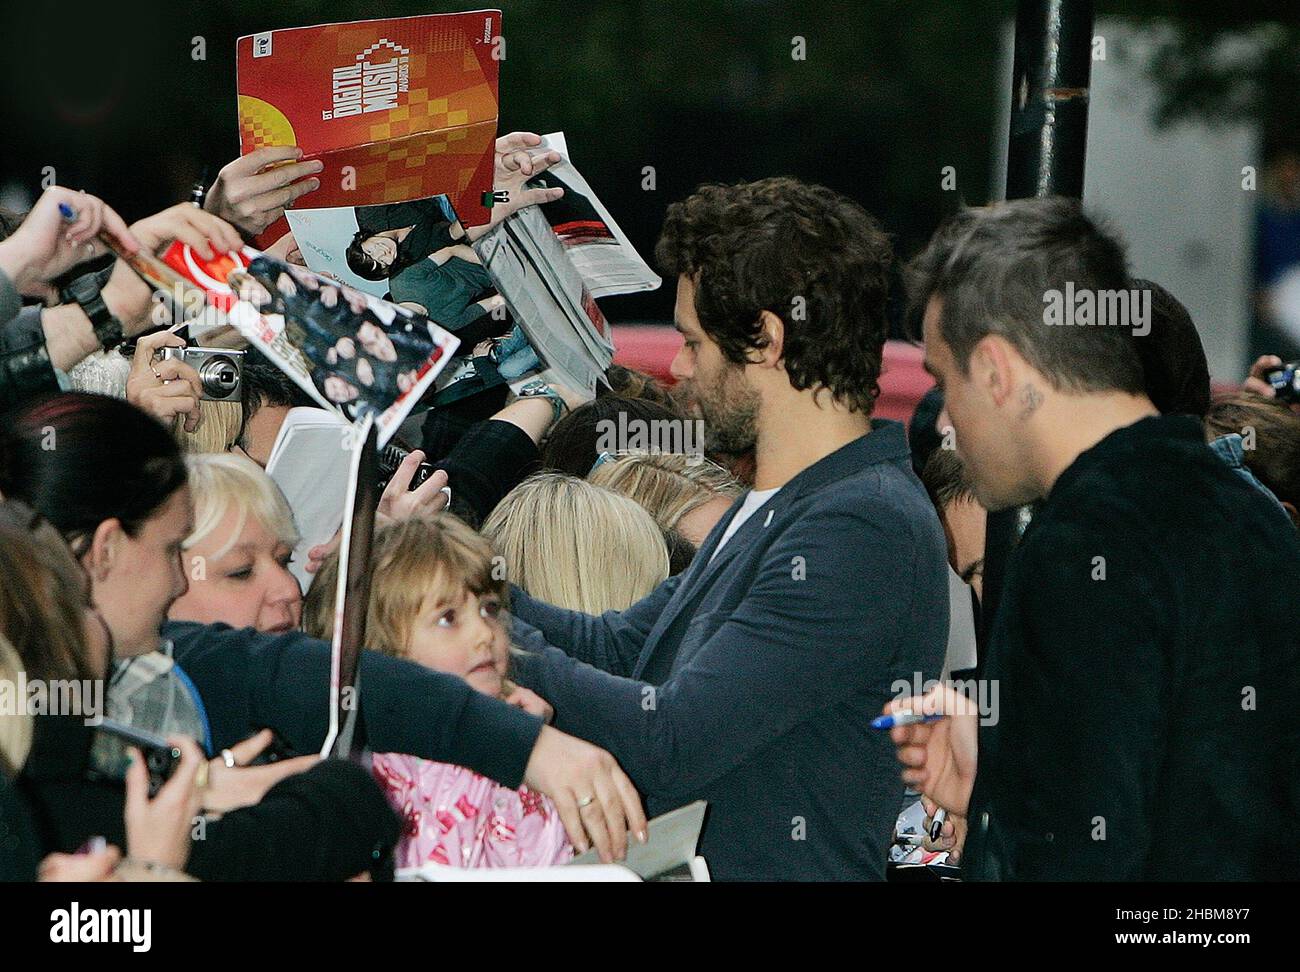 Howard Donald Robbie Wiliams of Take That signing autographs for fans at Radio 1 in central London. Stock Photo